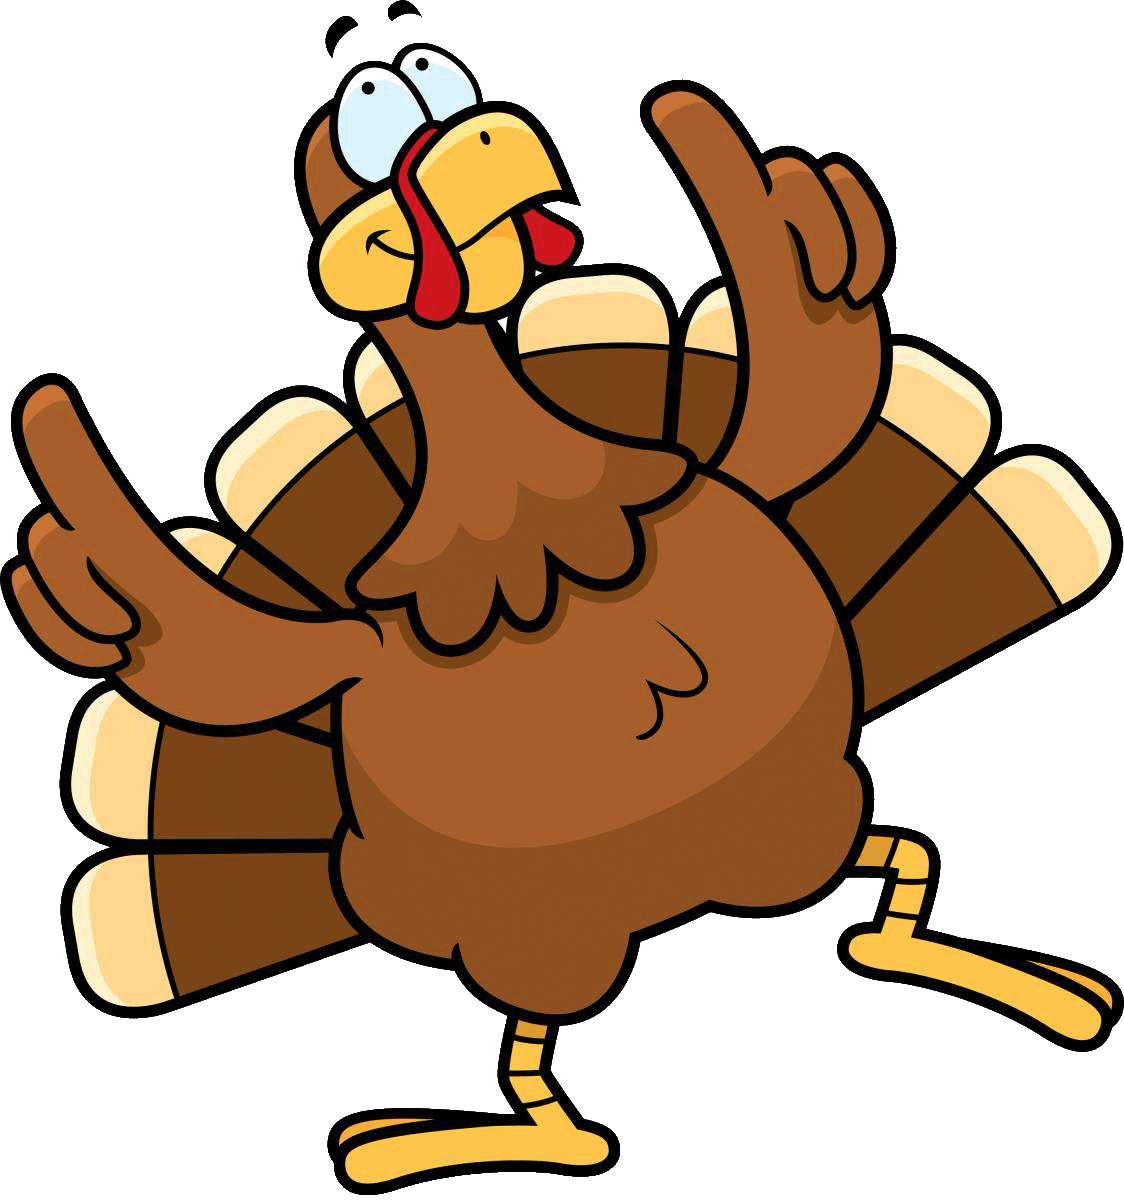 Pictures Of Animated Turkeys - Clipart library